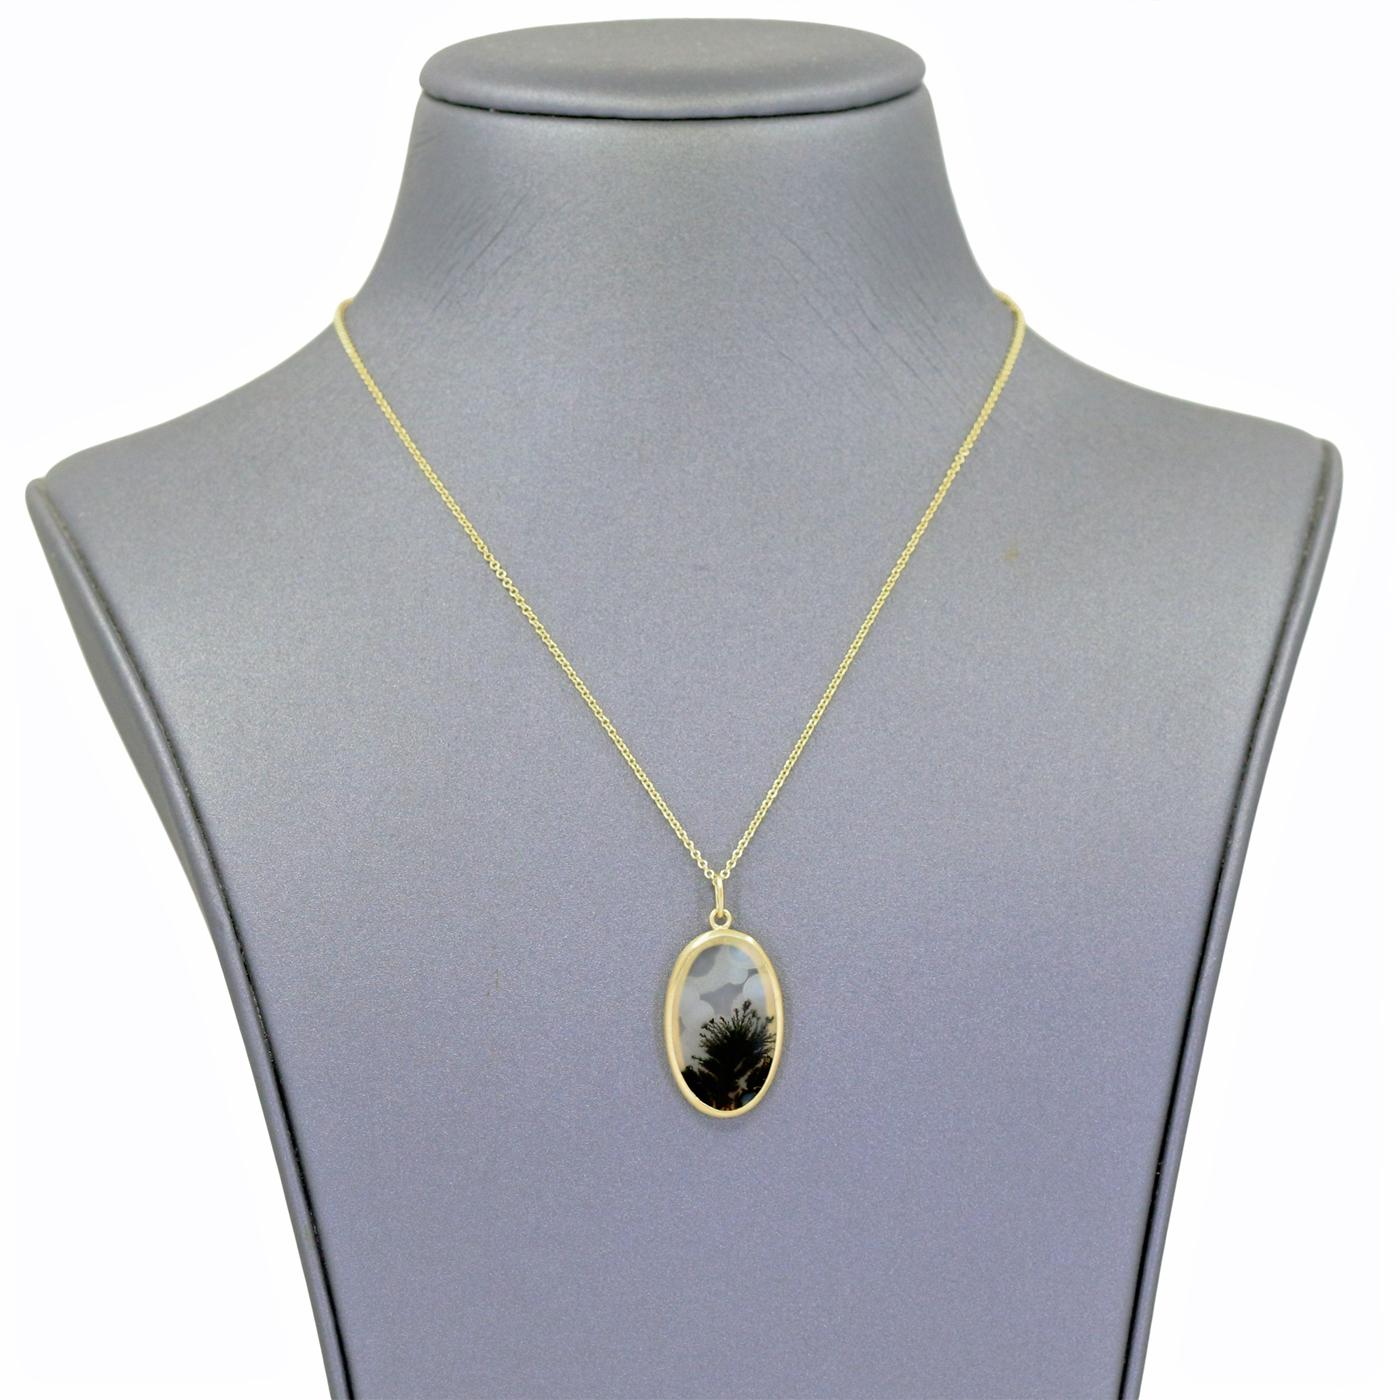 One of a Kind Drop Necklace handmade by jewelry artist Monica Marcella featuring a remarkable, three dimensional, translucent dendrite quartz with distinctive cloud patterning, hand-fabricated in Monica's matte-finished 18k yellow gold on an 16 inch